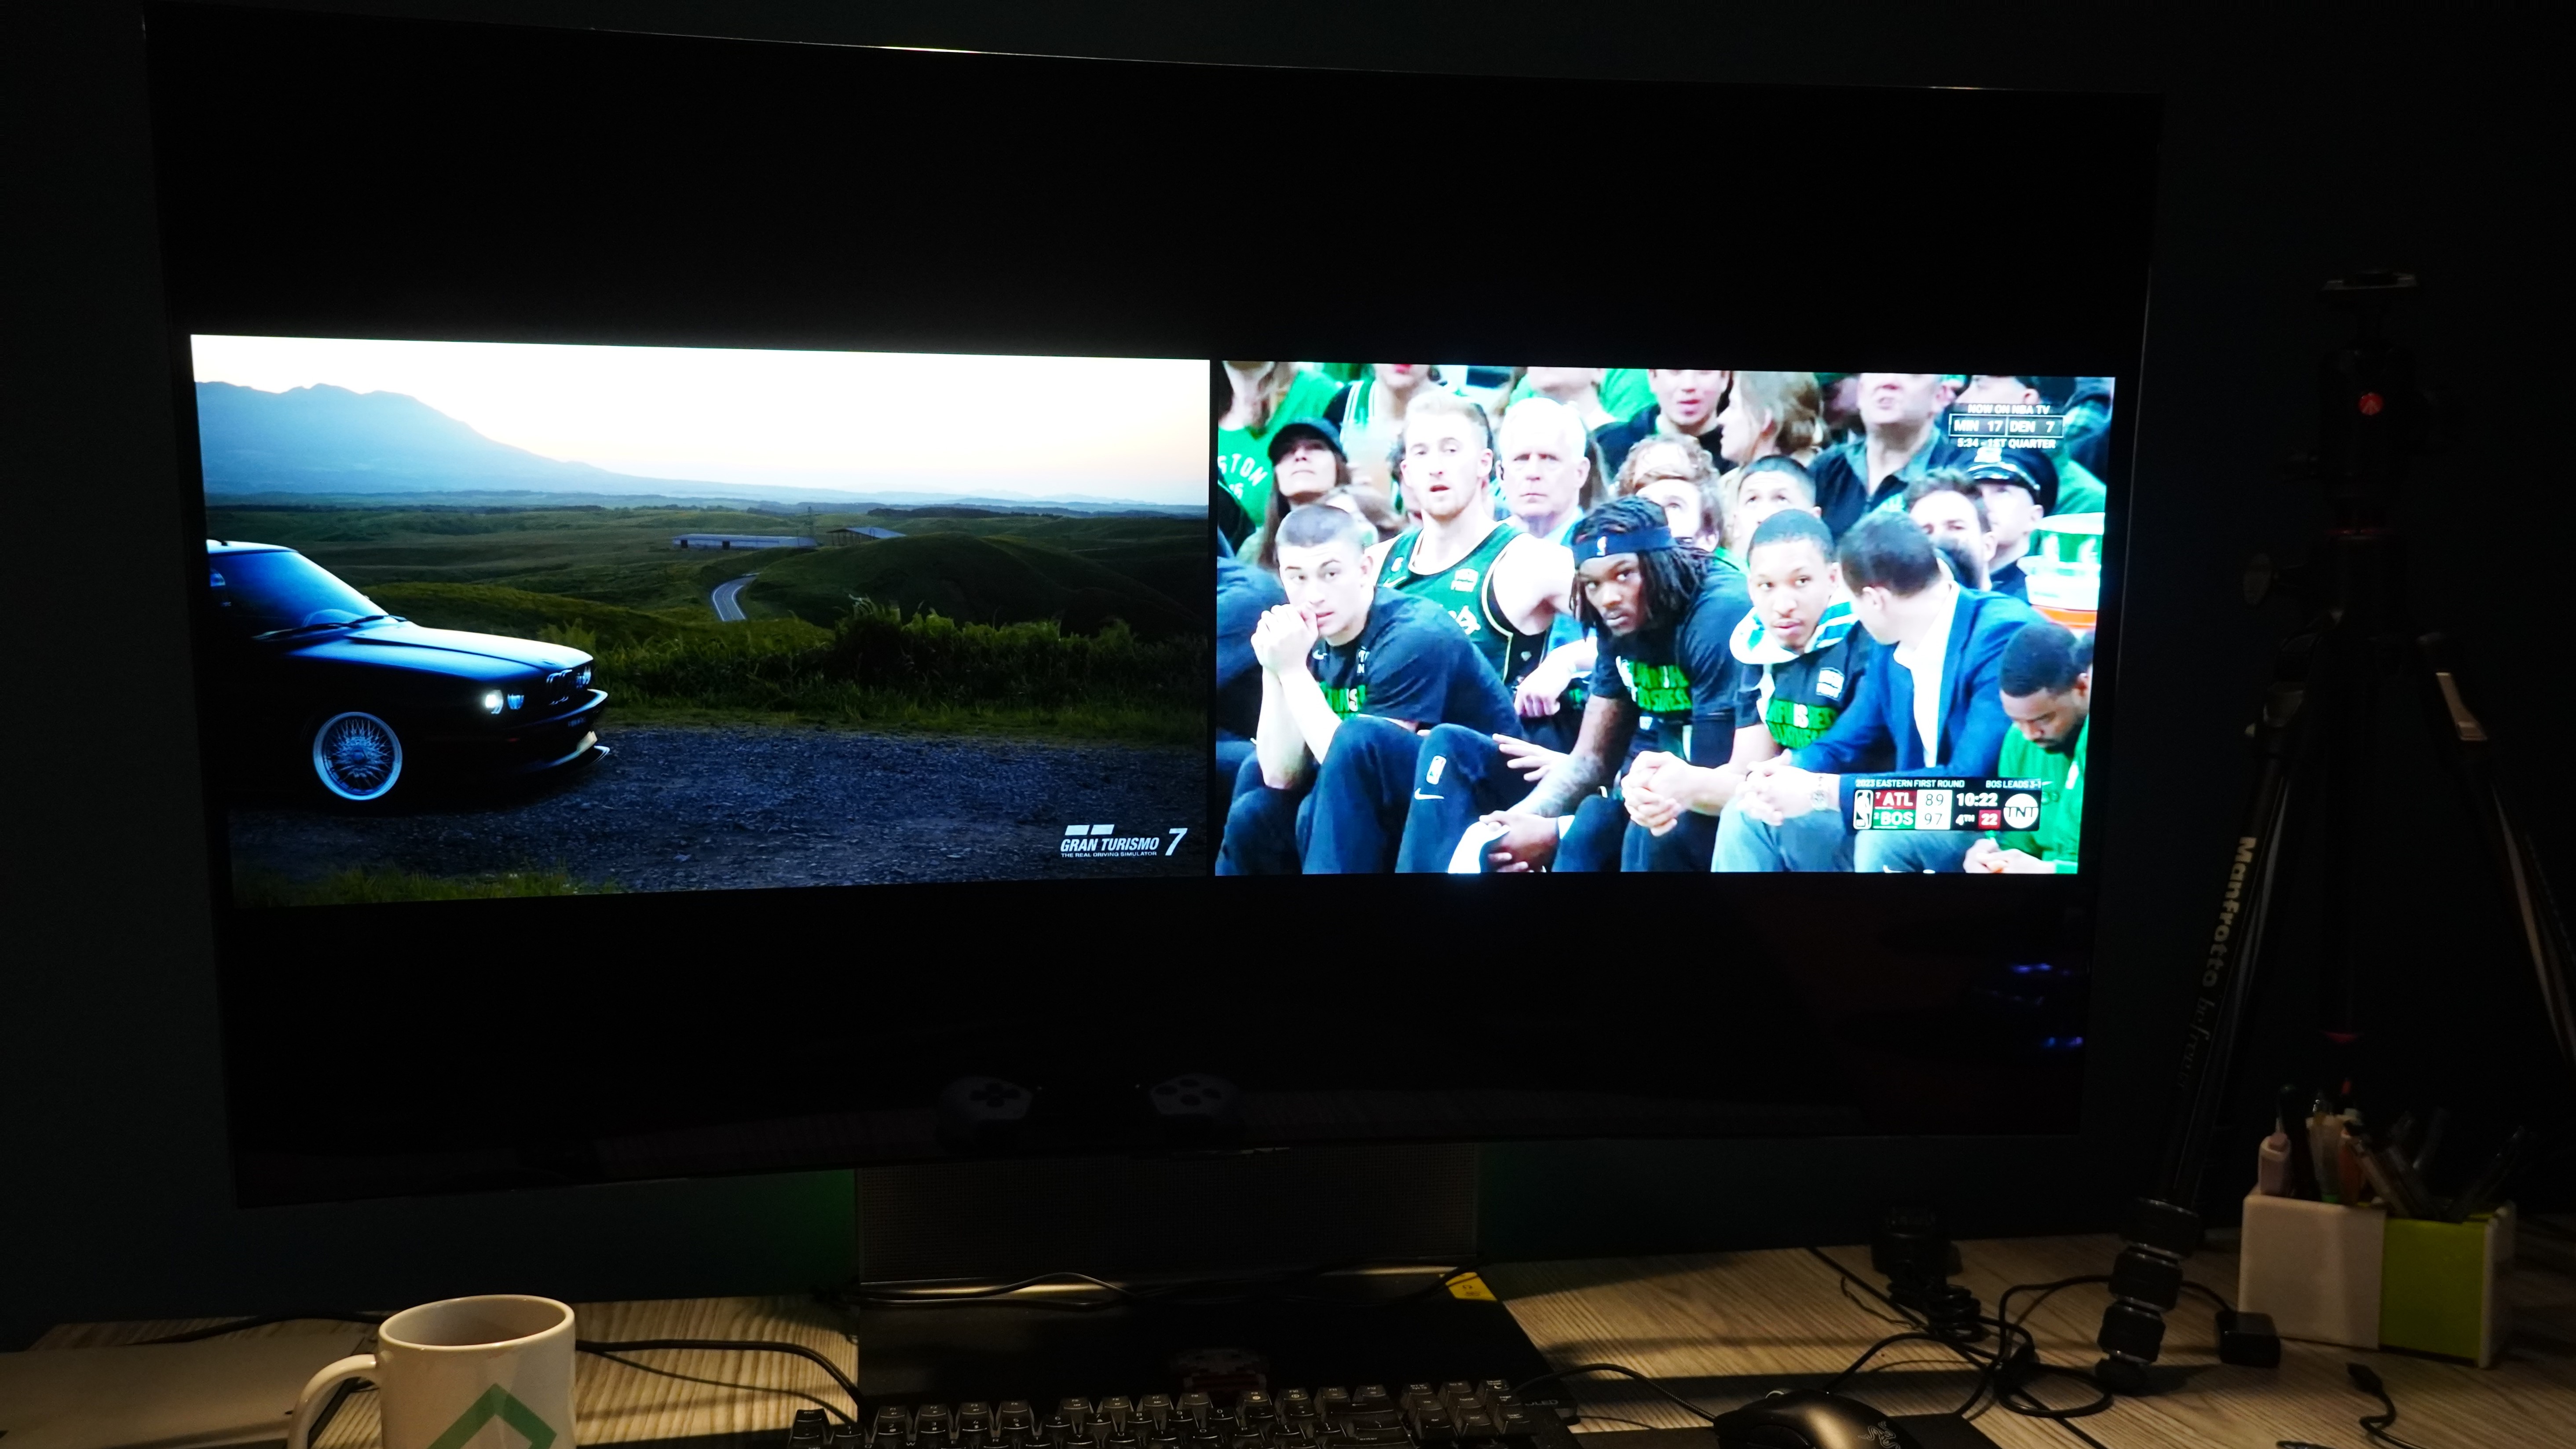 A split-screen mode on an OLED TV shows a BMW driving across a gravel road on the lefthand pane, which is showing Gran Turismo 7, while on the right hand pane a group of Boston Celtics players look gravely toward the camera during a close playoff game on YouTube TV.